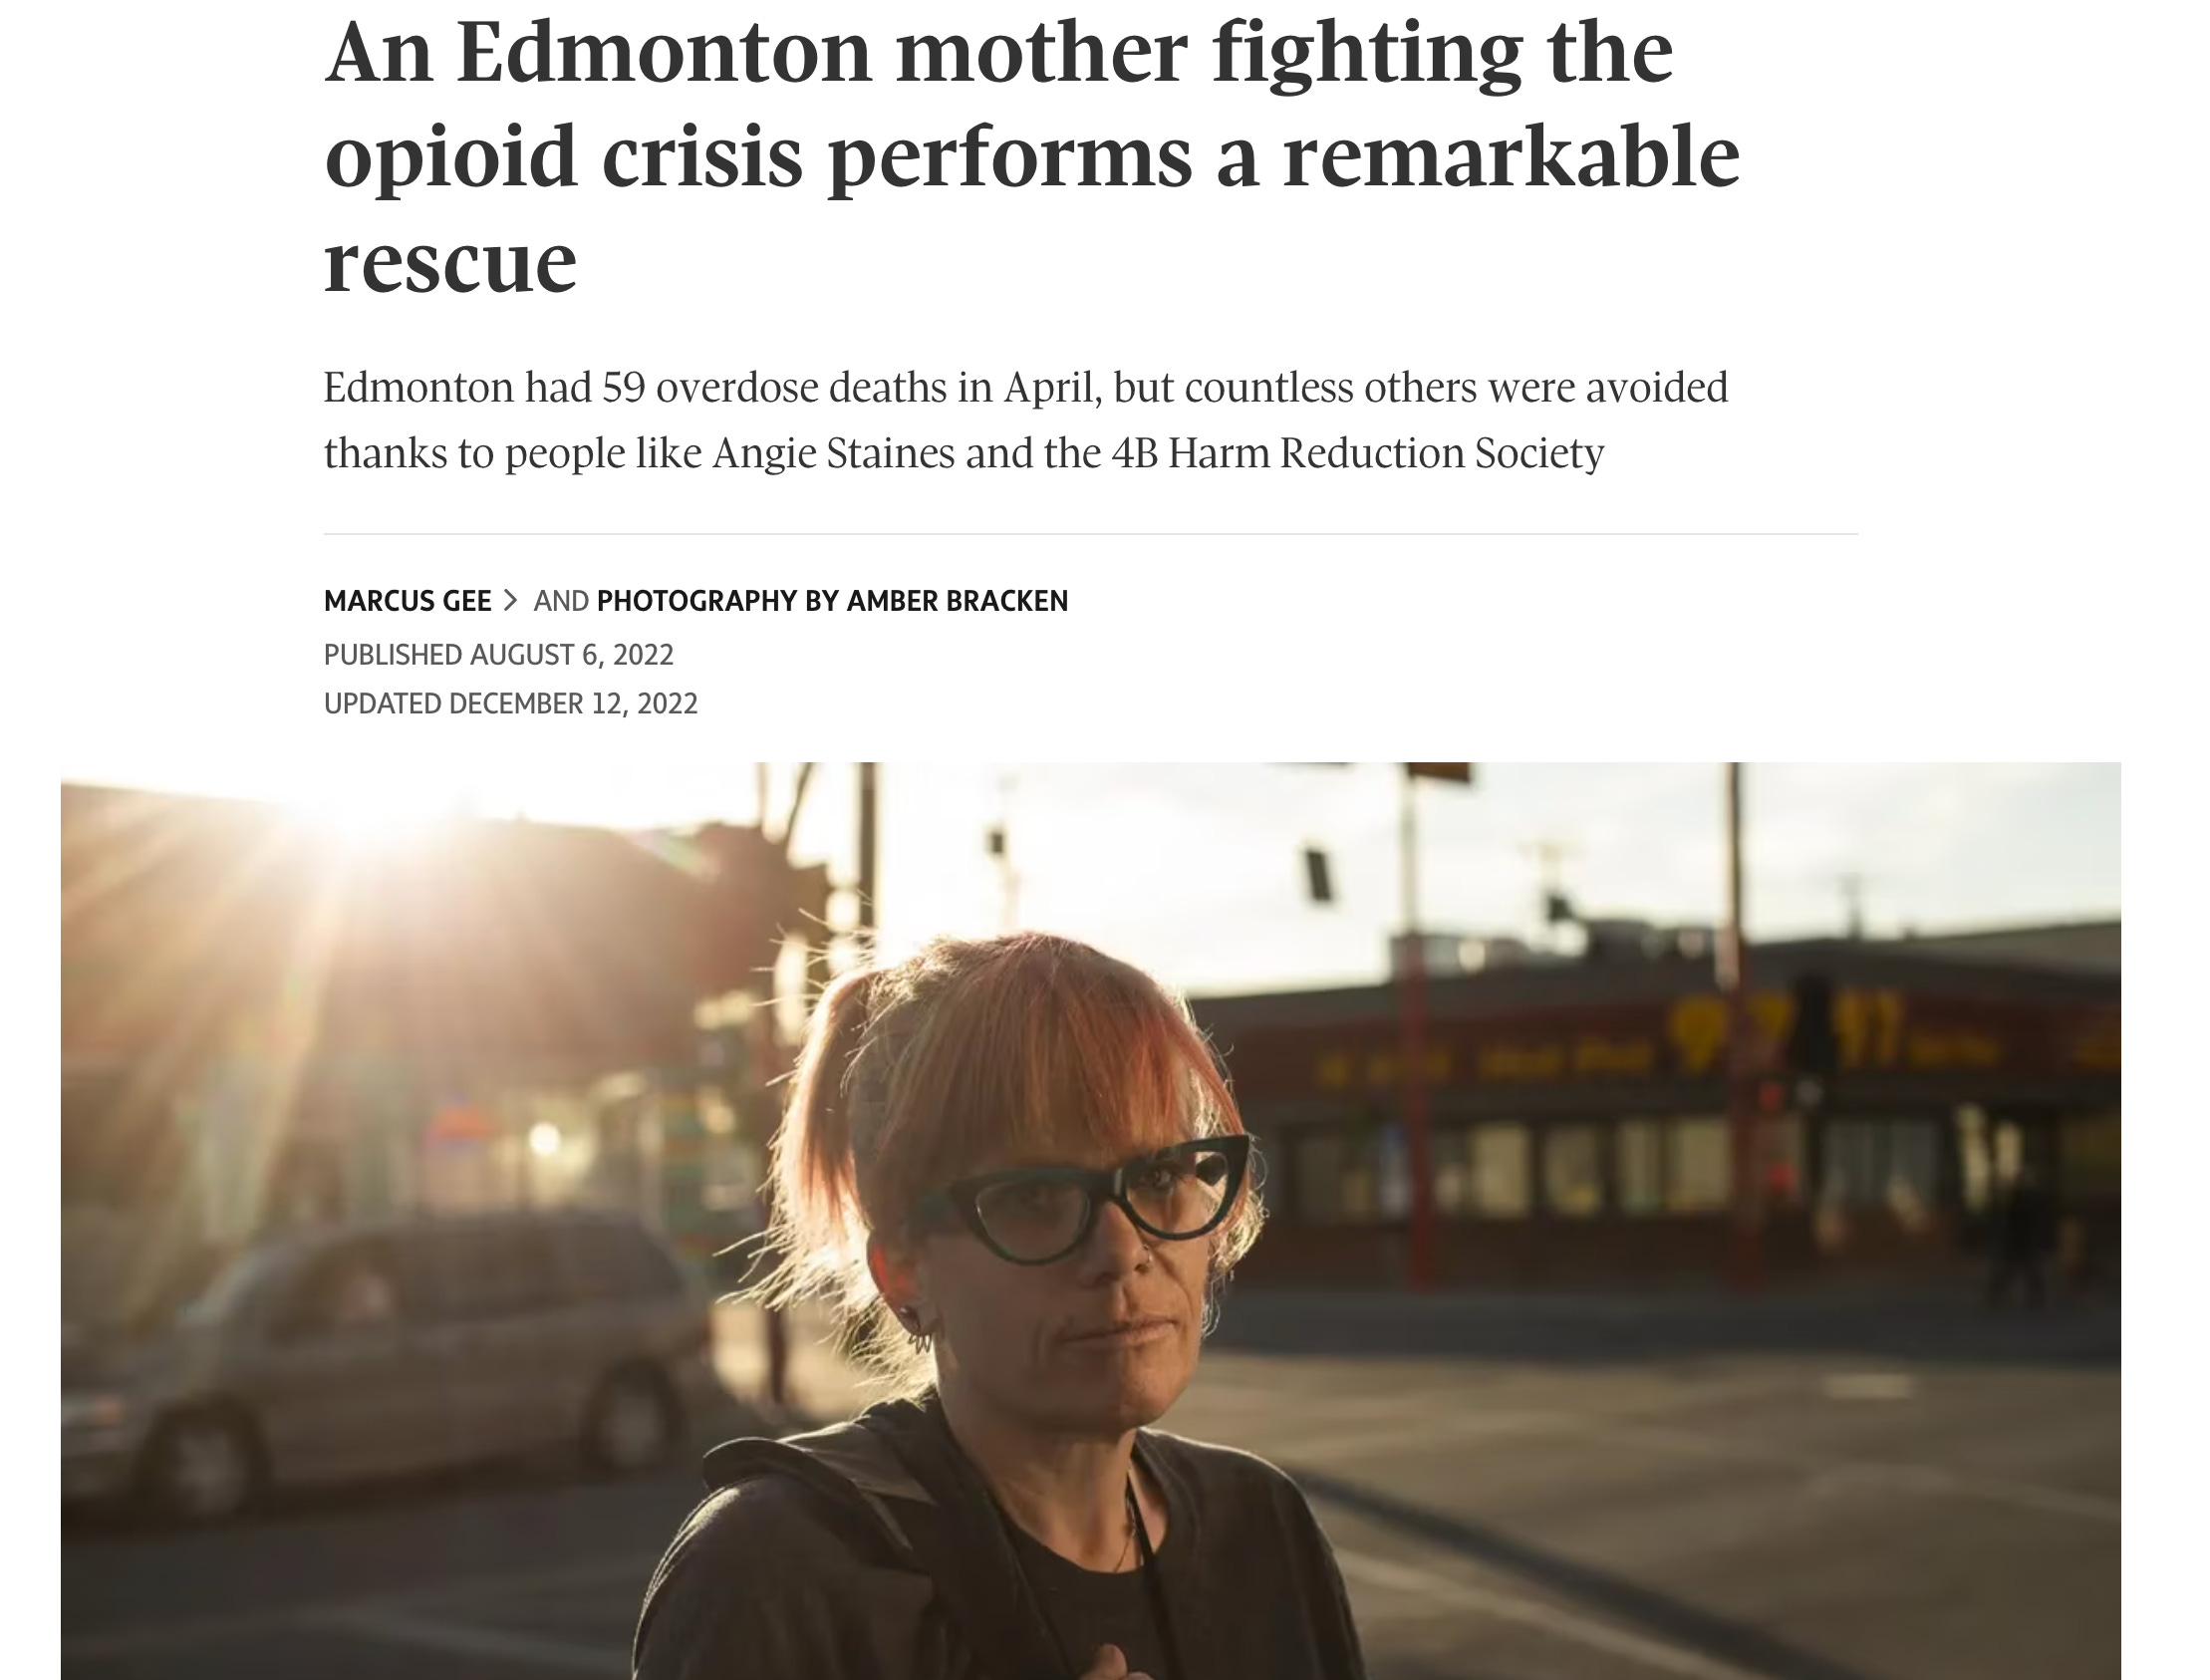 In Edmonton mother fighting the opioid crisis performs a remarkable rescue. Edmonton had 59 overdose deaths in April, a number that was reduced thanks to people like Angie Staines and 4B Harm Reduction Society